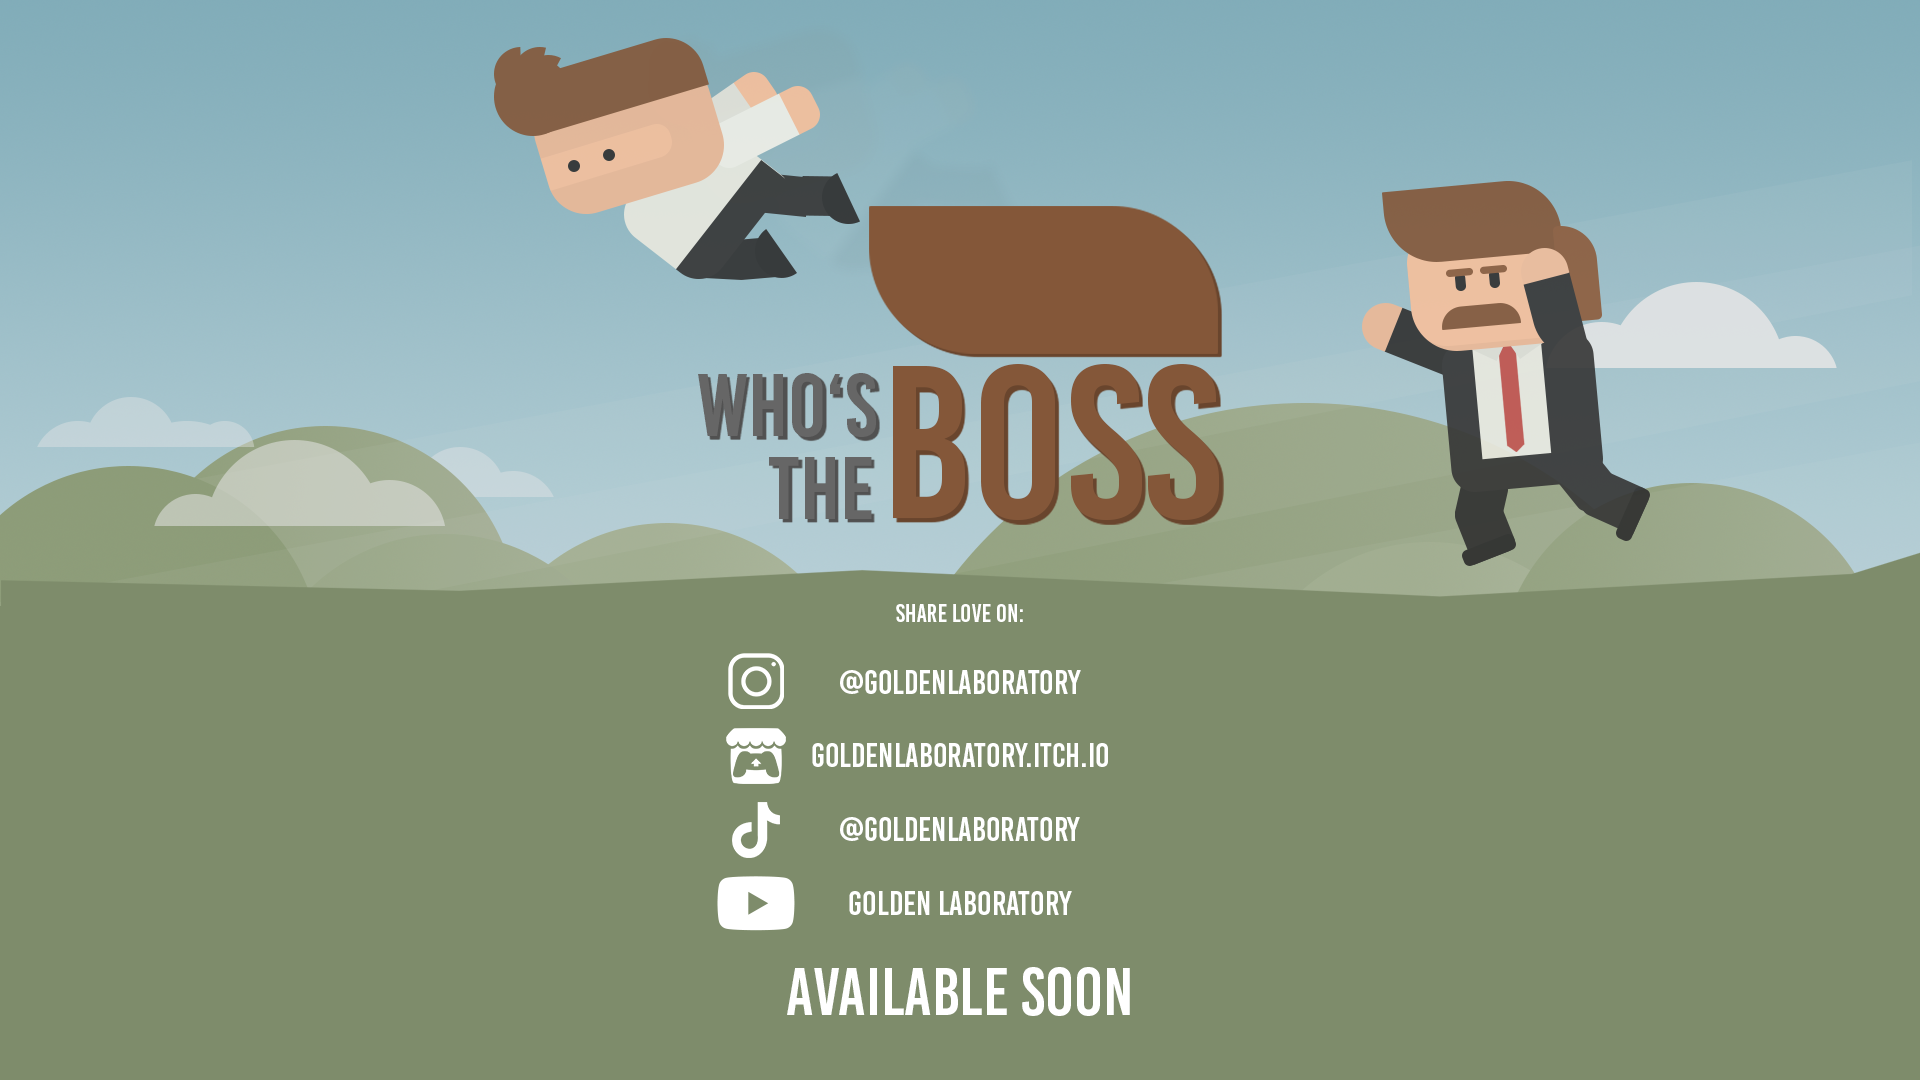 Who's the boss?